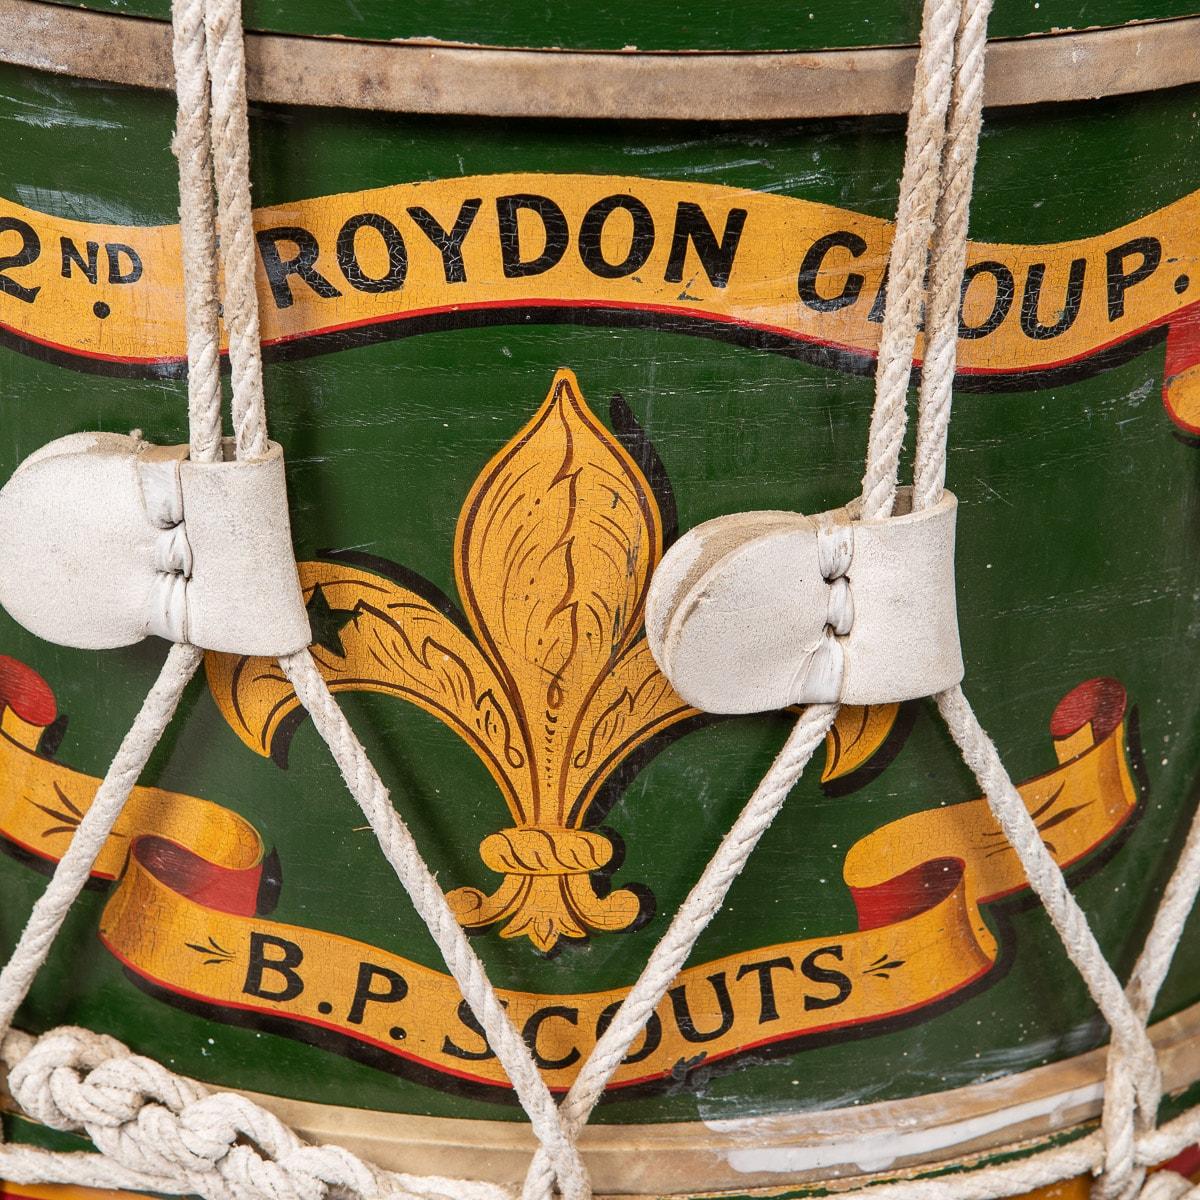 20th Century British Ceremonial Drum from the 22nd Croydon Group 8